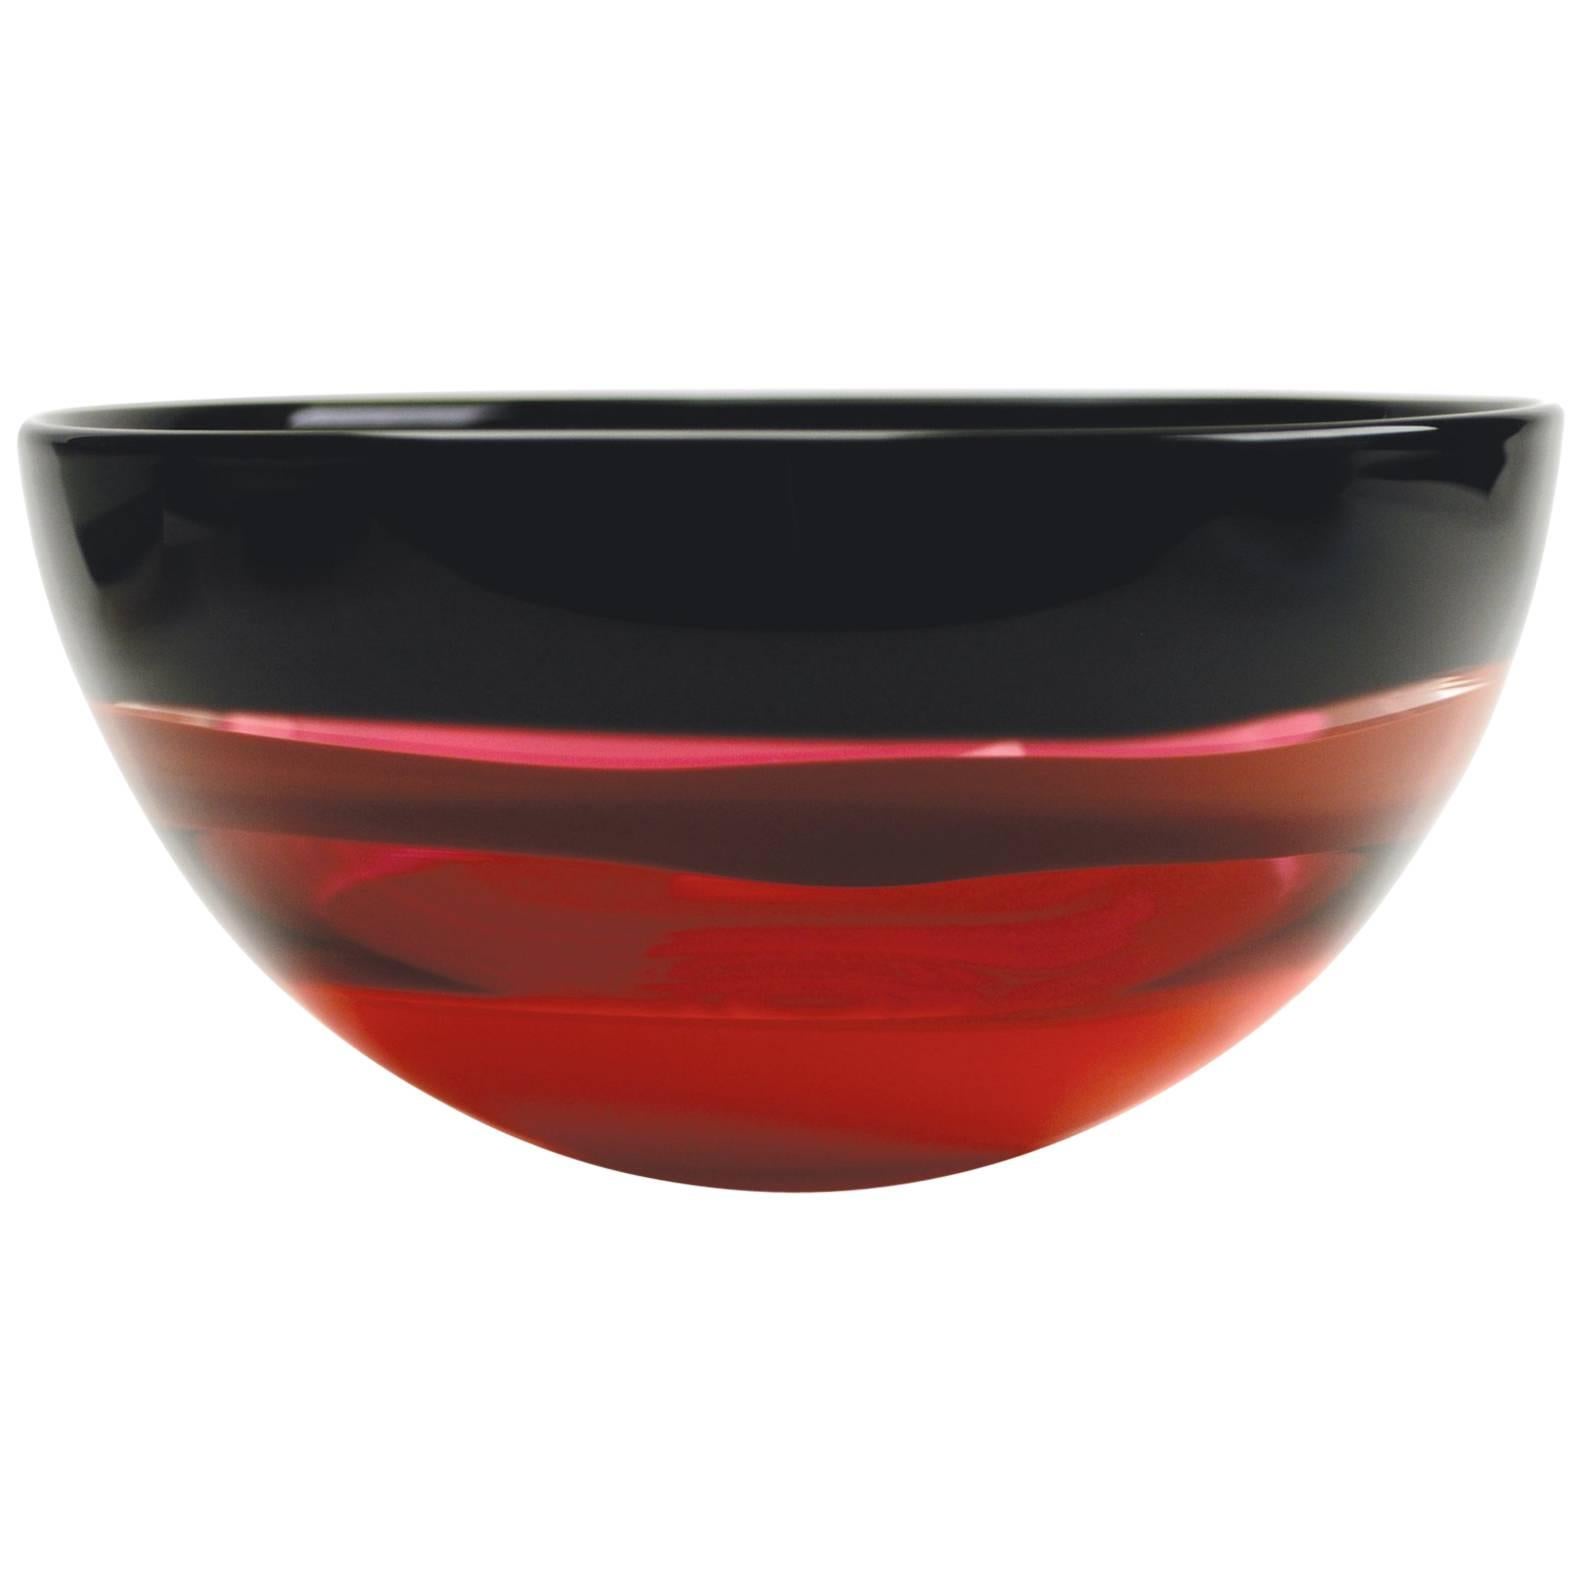 Red Murano Inspired Glass Bowl, Banded Series by Siemon & Salazar